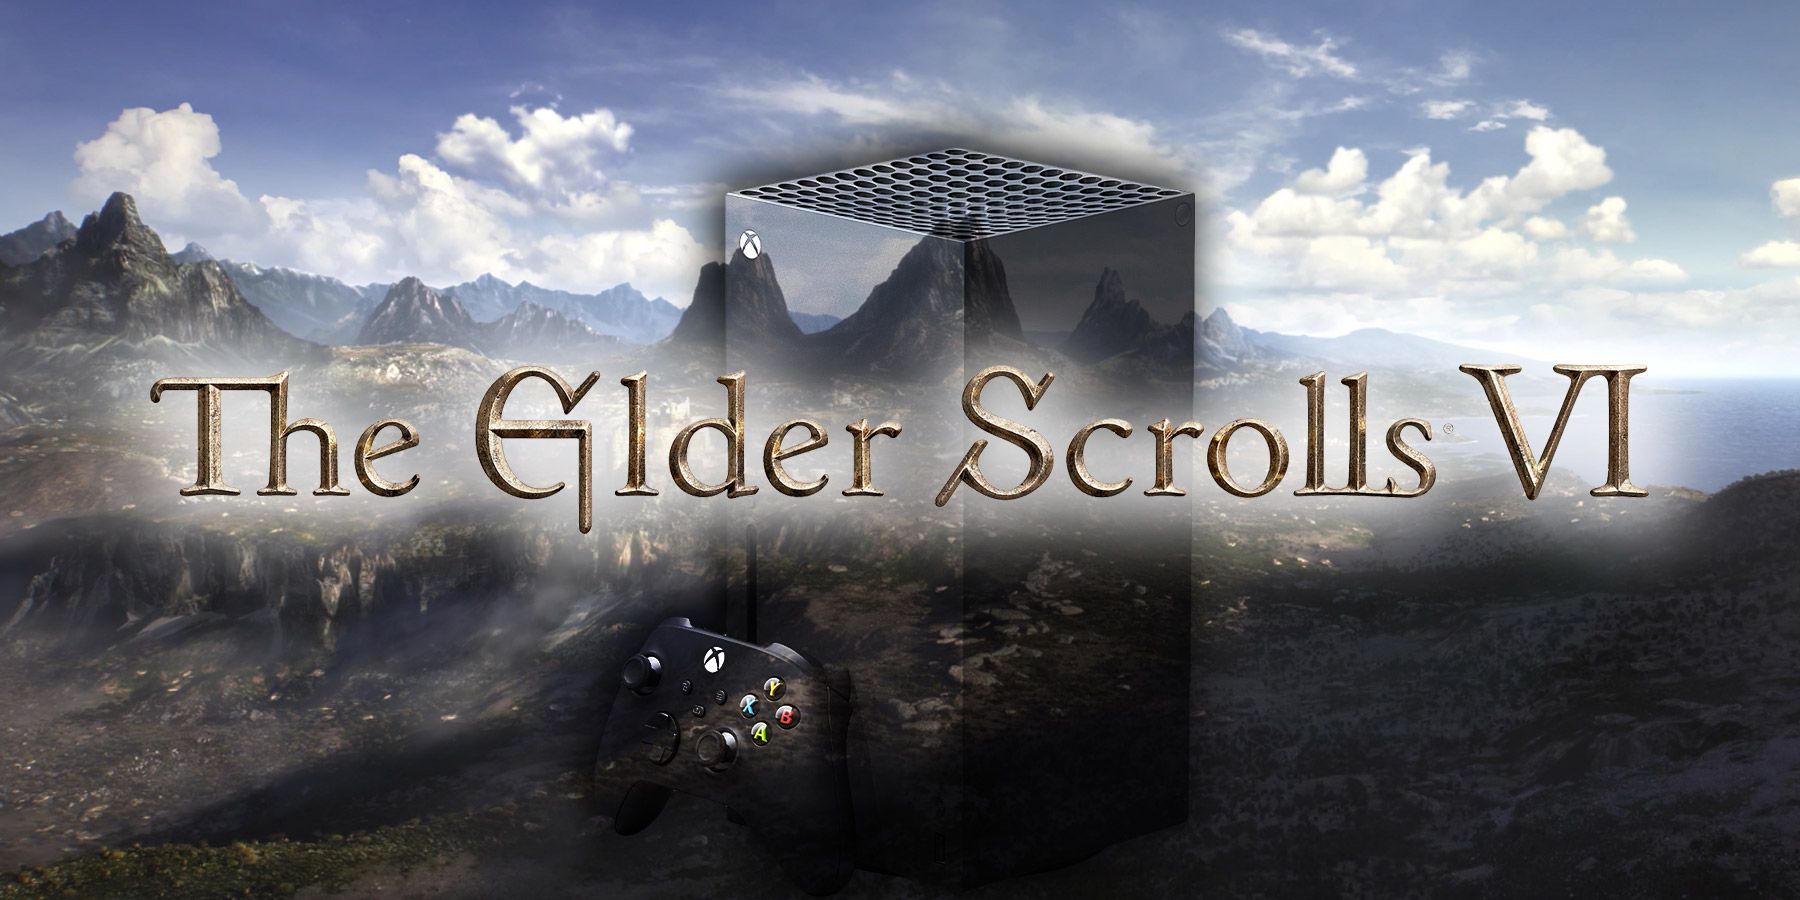 The Elder Scrolls 6 will not be released on PS5, according to a